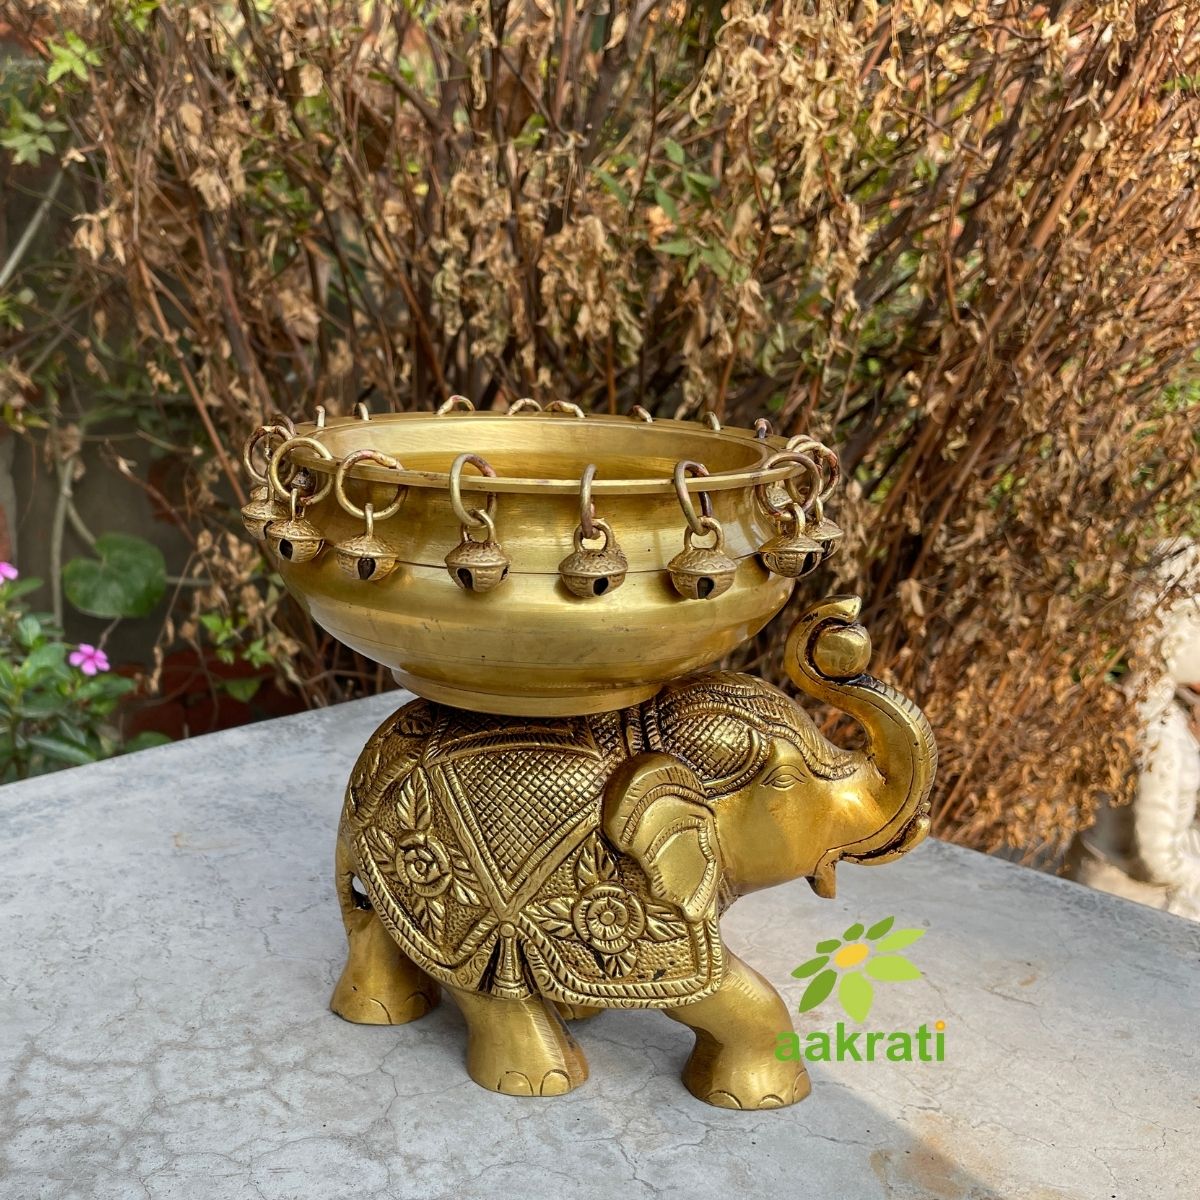 Aakrati Antique Finish Elephant Figurine with Hurli Great Addition to  Temple/Home Decor - Buy Urli - Pot & Planters Online